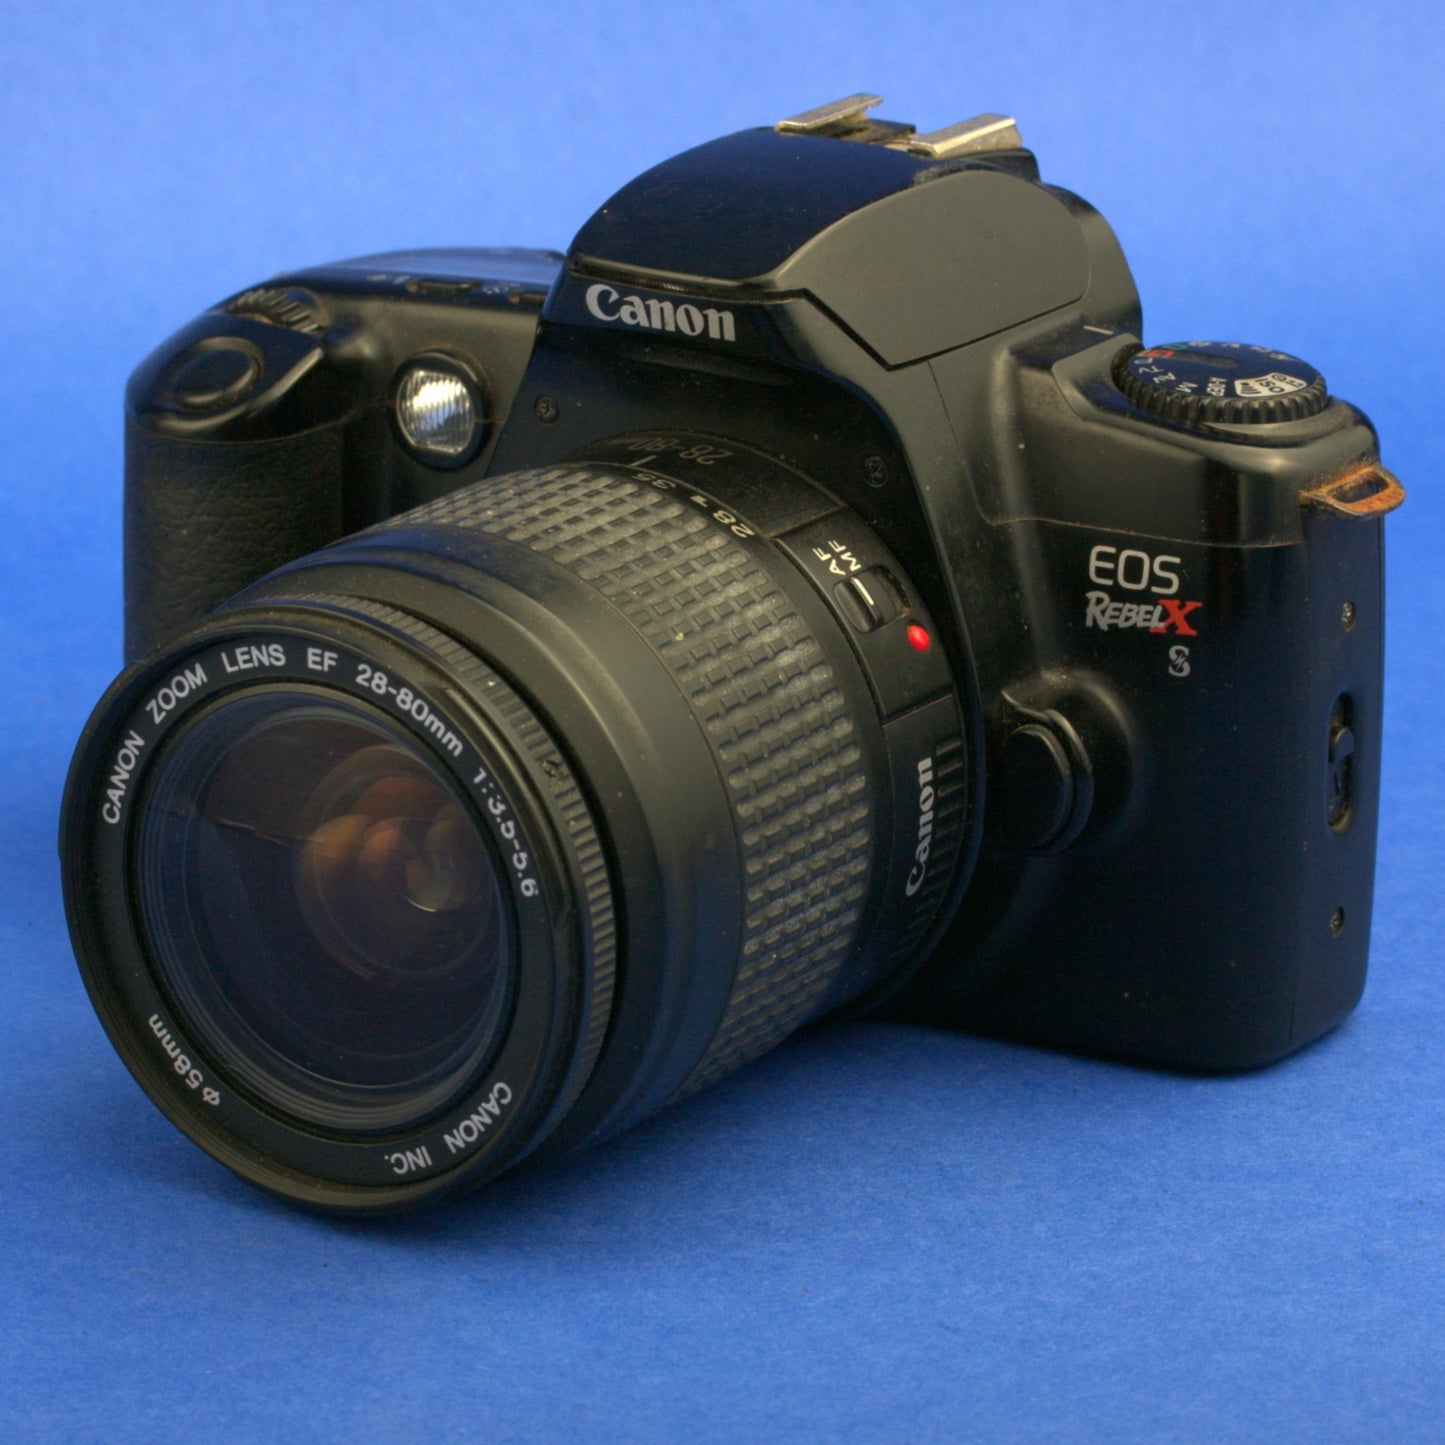 Canon EOS Rebel X S Film Camera with EF 28-80mm Lens